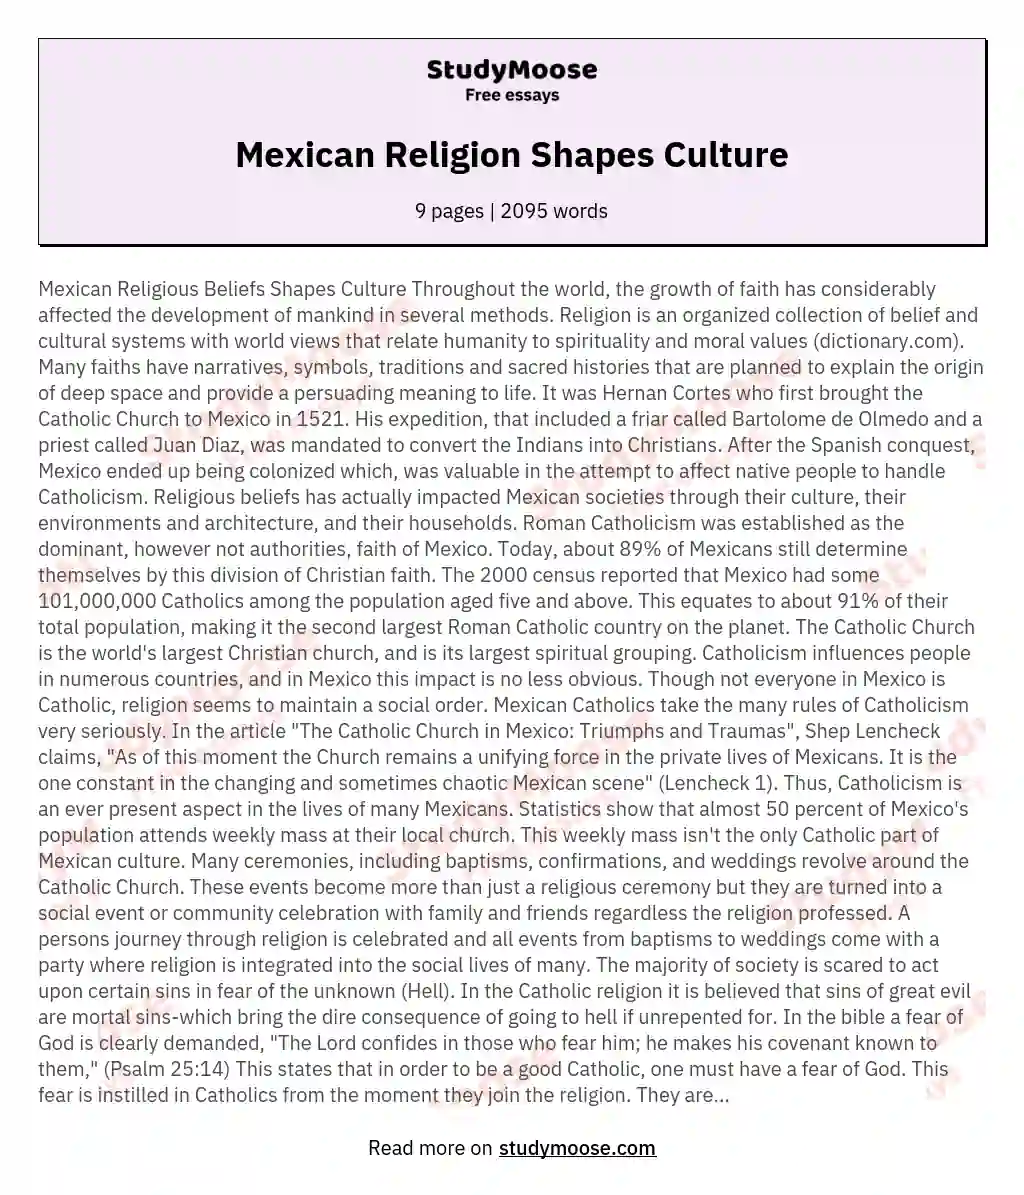 Mexican Religion Shapes Culture essay